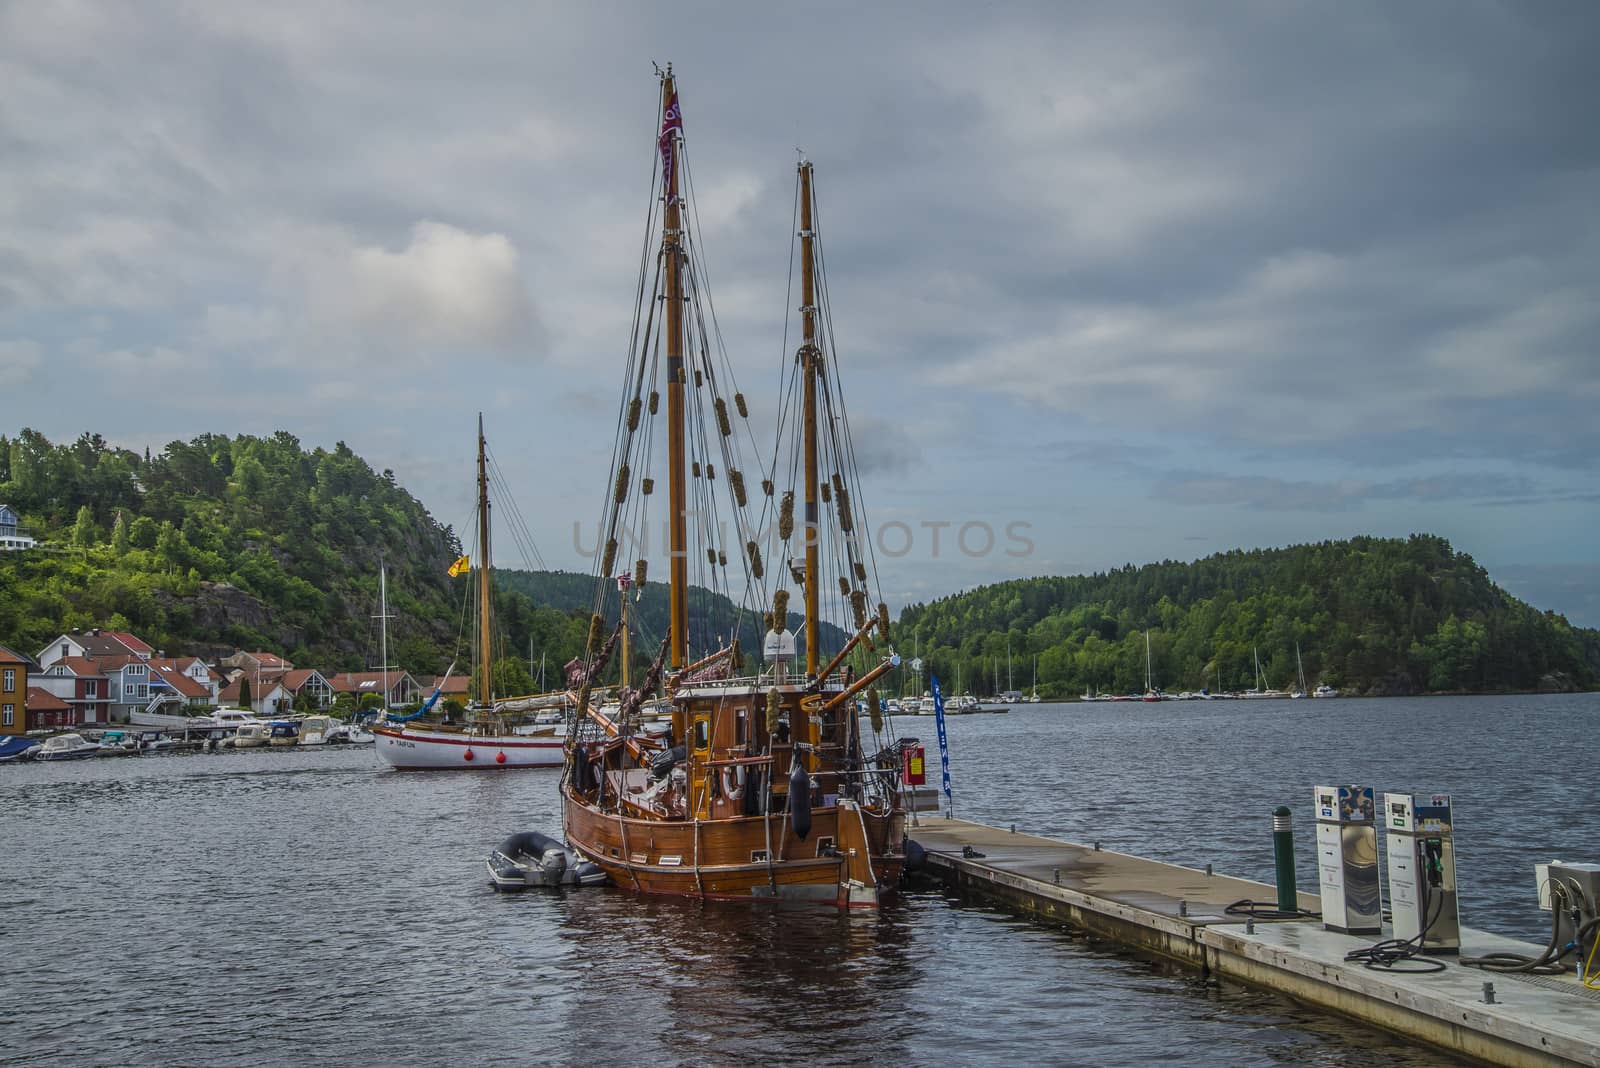 Exhibition of boats in the port of Halden, photo 11 by steirus